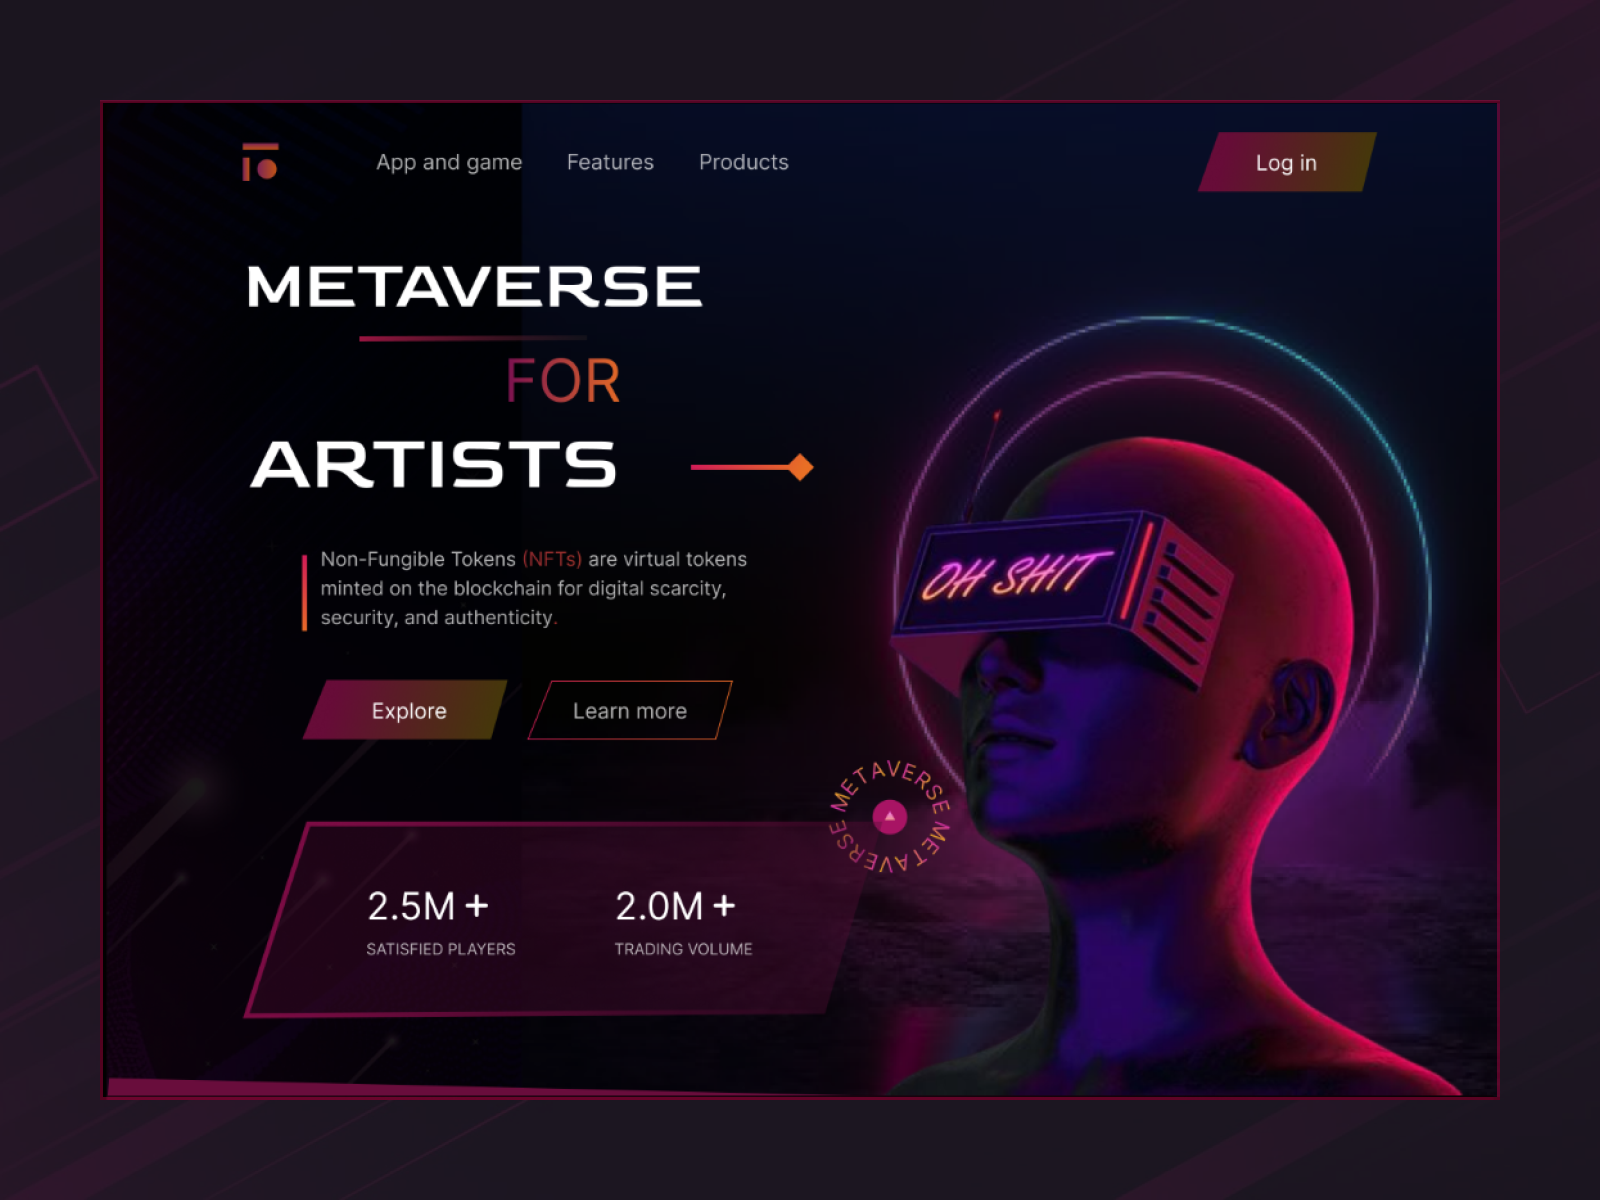 METAVERSE Landing Page by Abul Kalam Azad on Dribbble